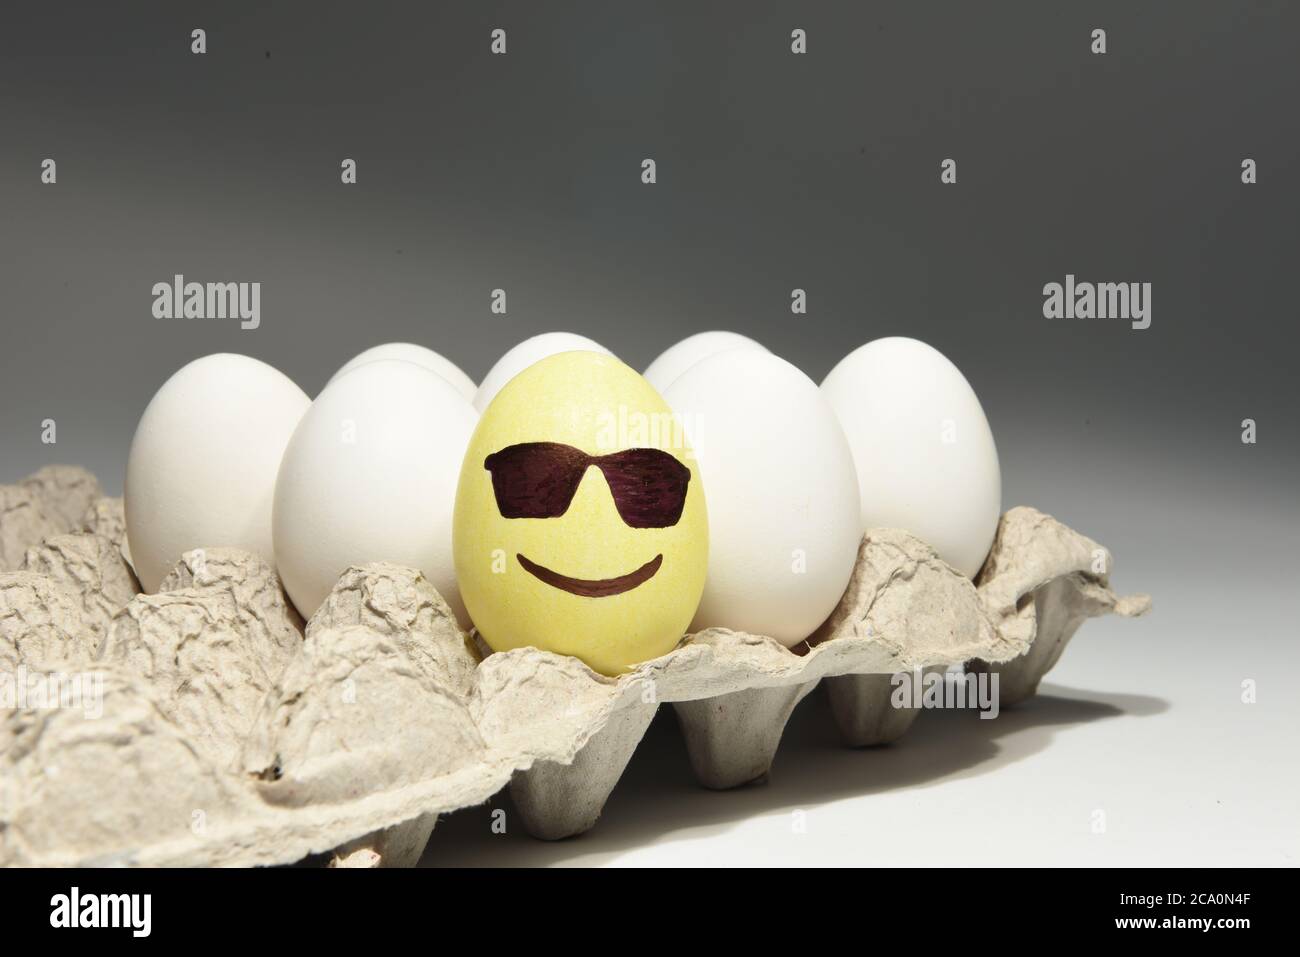 Cool smiley face emoji with dark sunglasses on egg shell Stock Photo